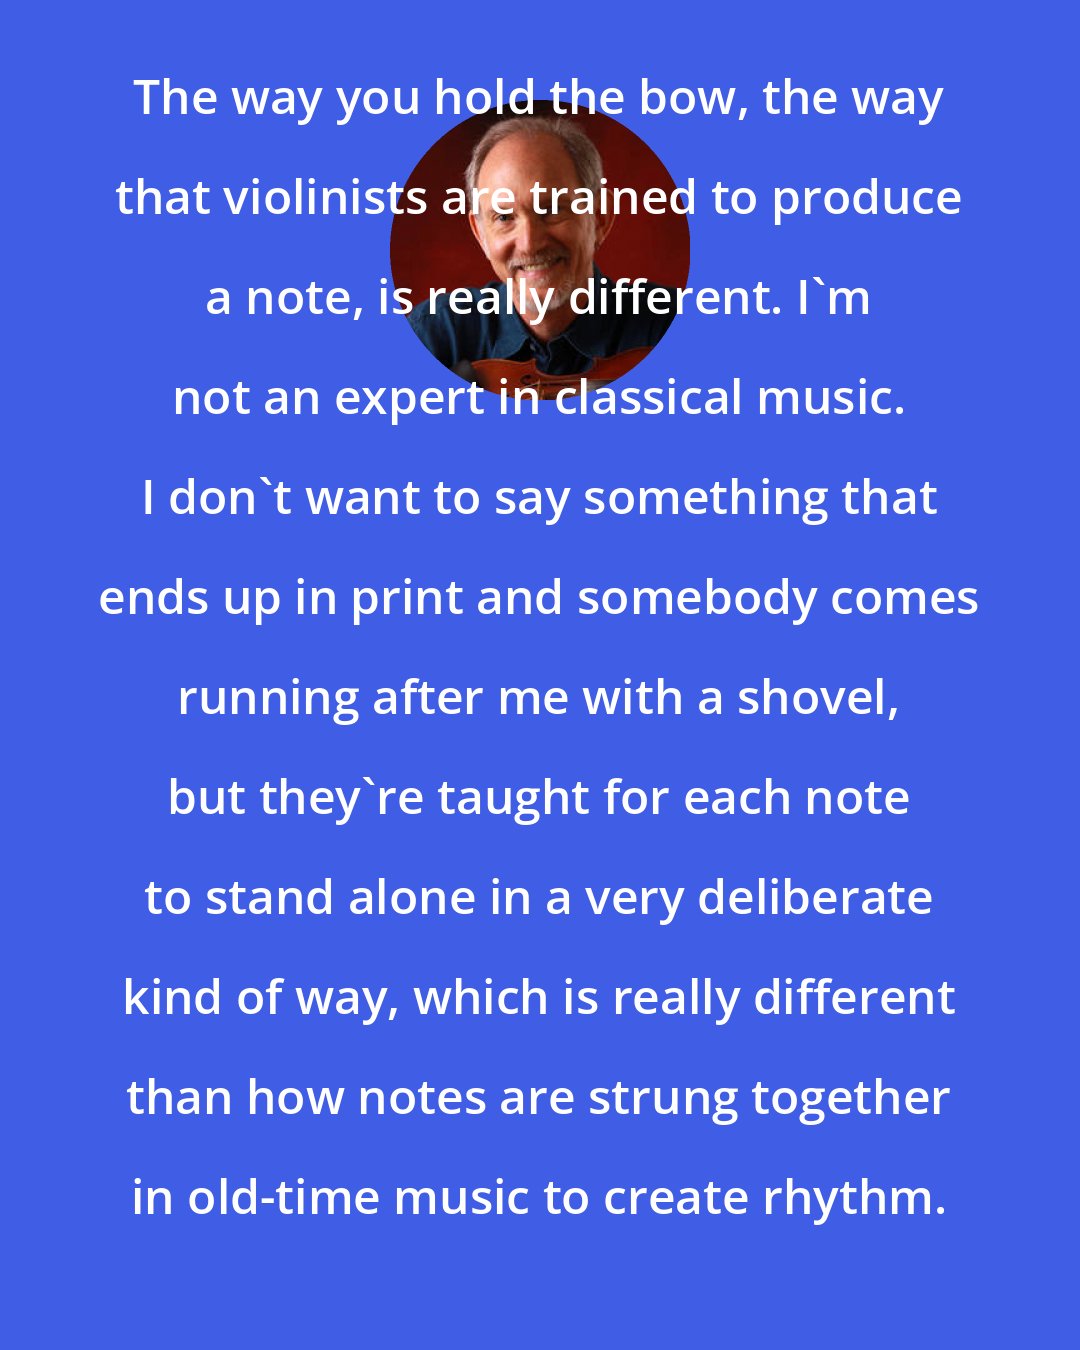 Bruce Molsky: The way you hold the bow, the way that violinists are trained to produce a note, is really different. I'm not an expert in classical music. I don't want to say something that ends up in print and somebody comes running after me with a shovel, but they're taught for each note to stand alone in a very deliberate kind of way, which is really different than how notes are strung together in old-time music to create rhythm.